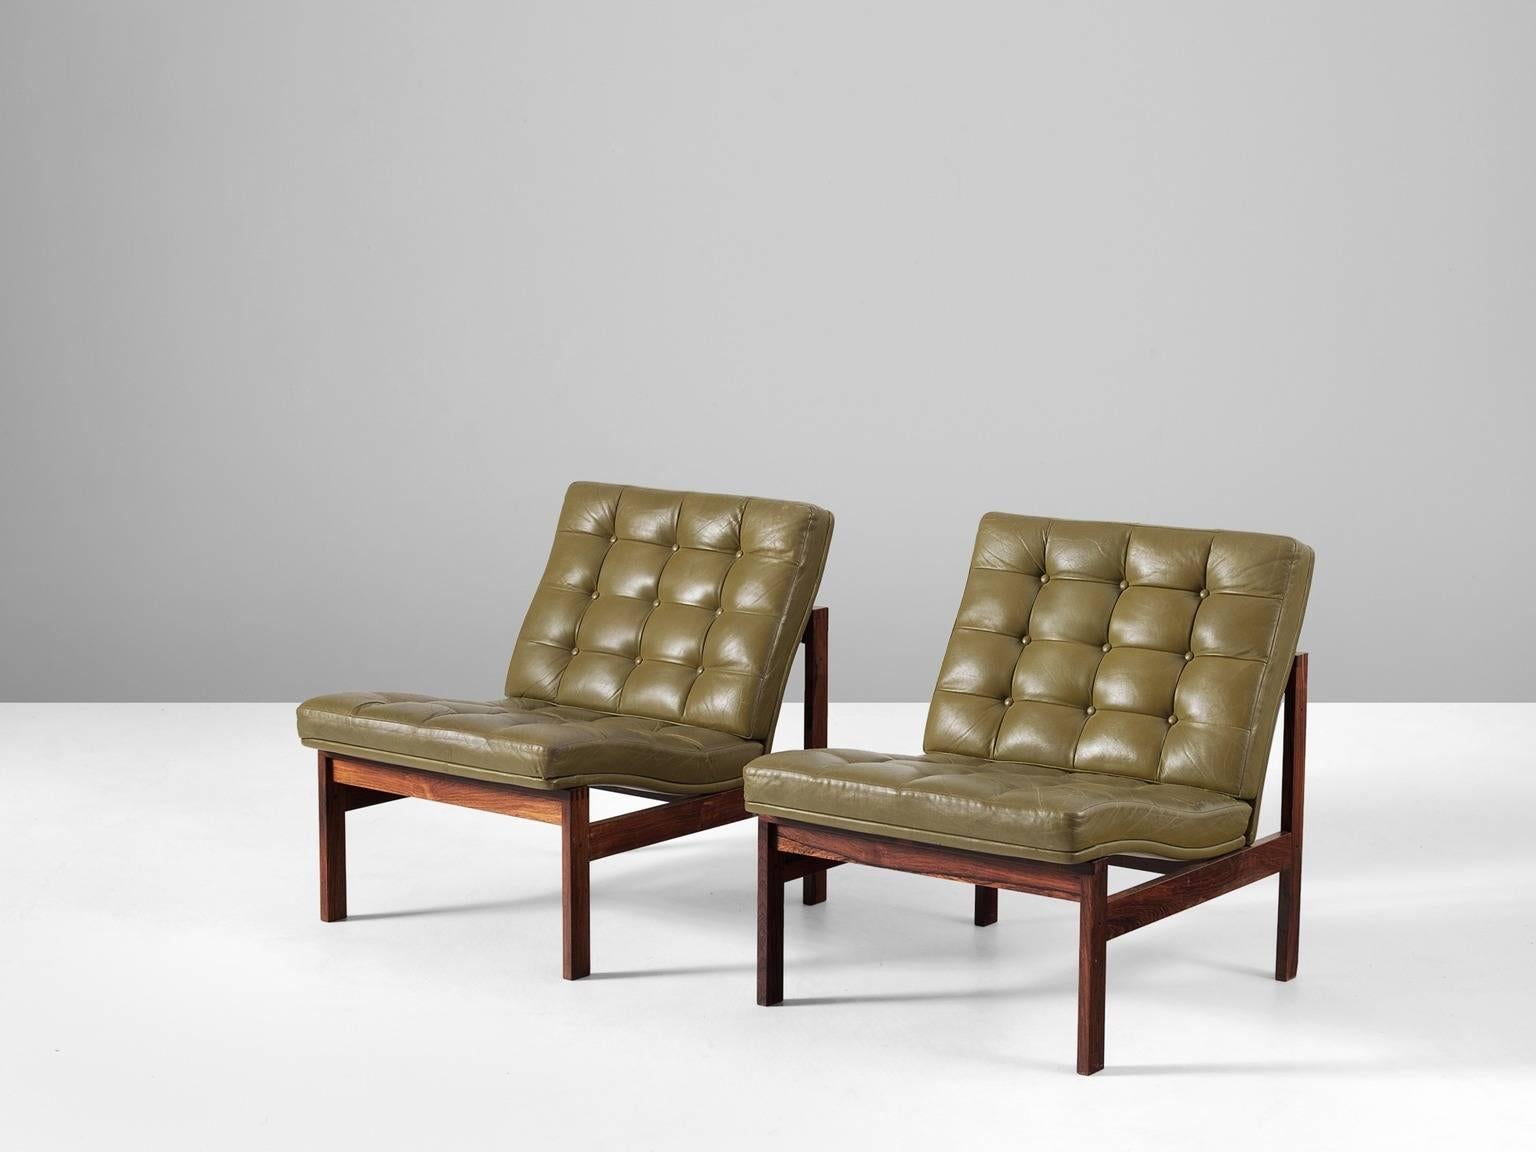 Pair of easy chairs, in rosewood and leather, by Ole Gjerløv-Knudsen & Torben Lind for France & Søn, Denmark 1962.

Modern and beautiful colored set of easy chairs. These chairs have a tight and simple design. With a frame of rosewood and L-shaped